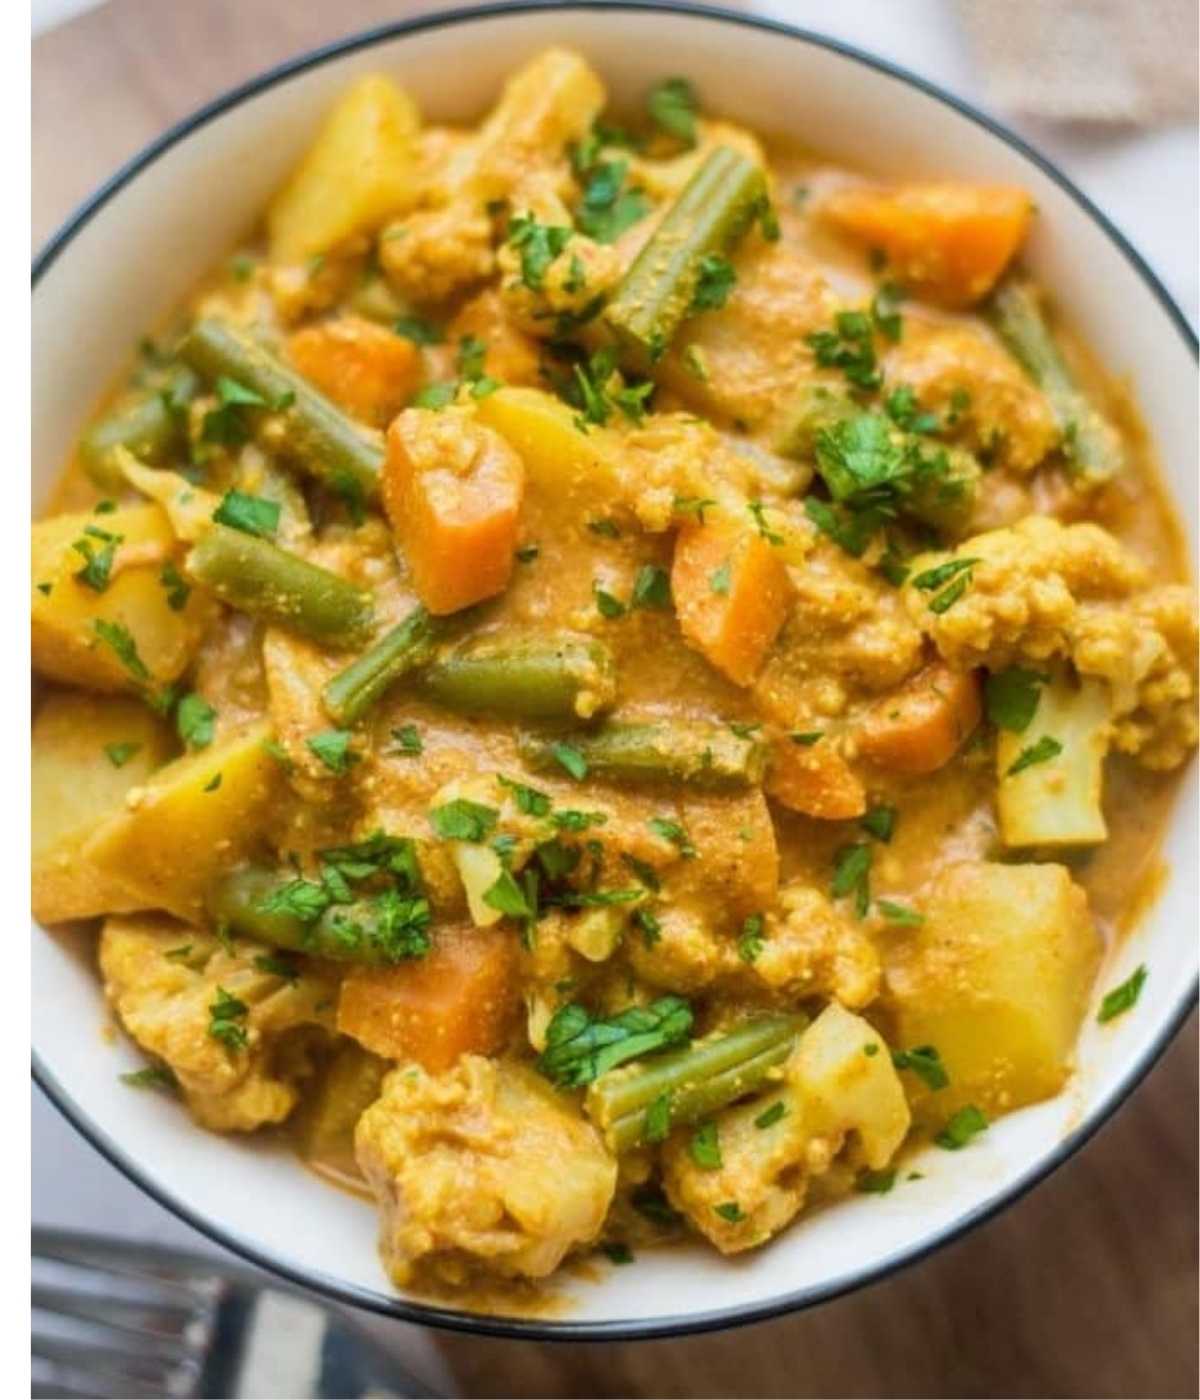 A bowl of vegetable curry